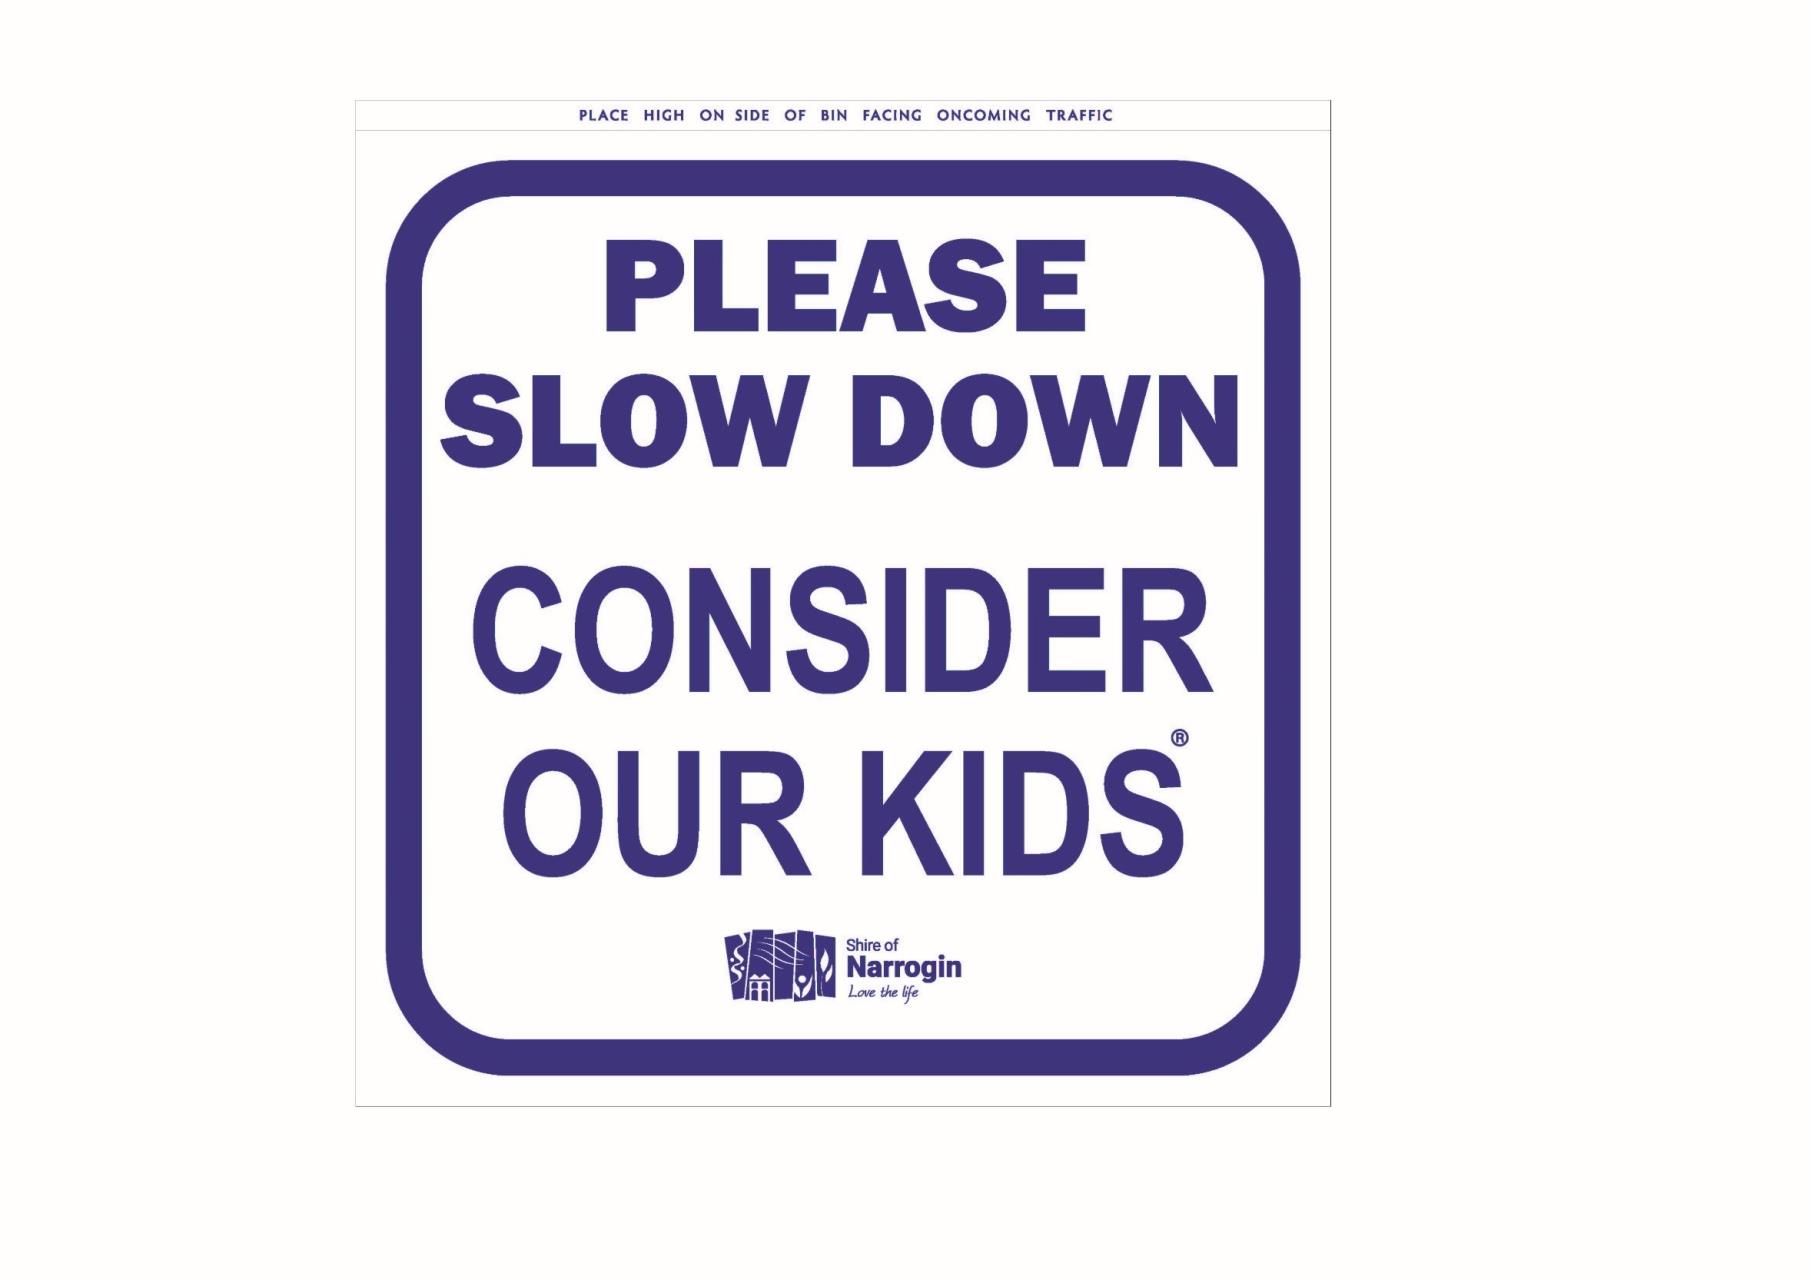 'Please Slow Down Consider Our Kids'